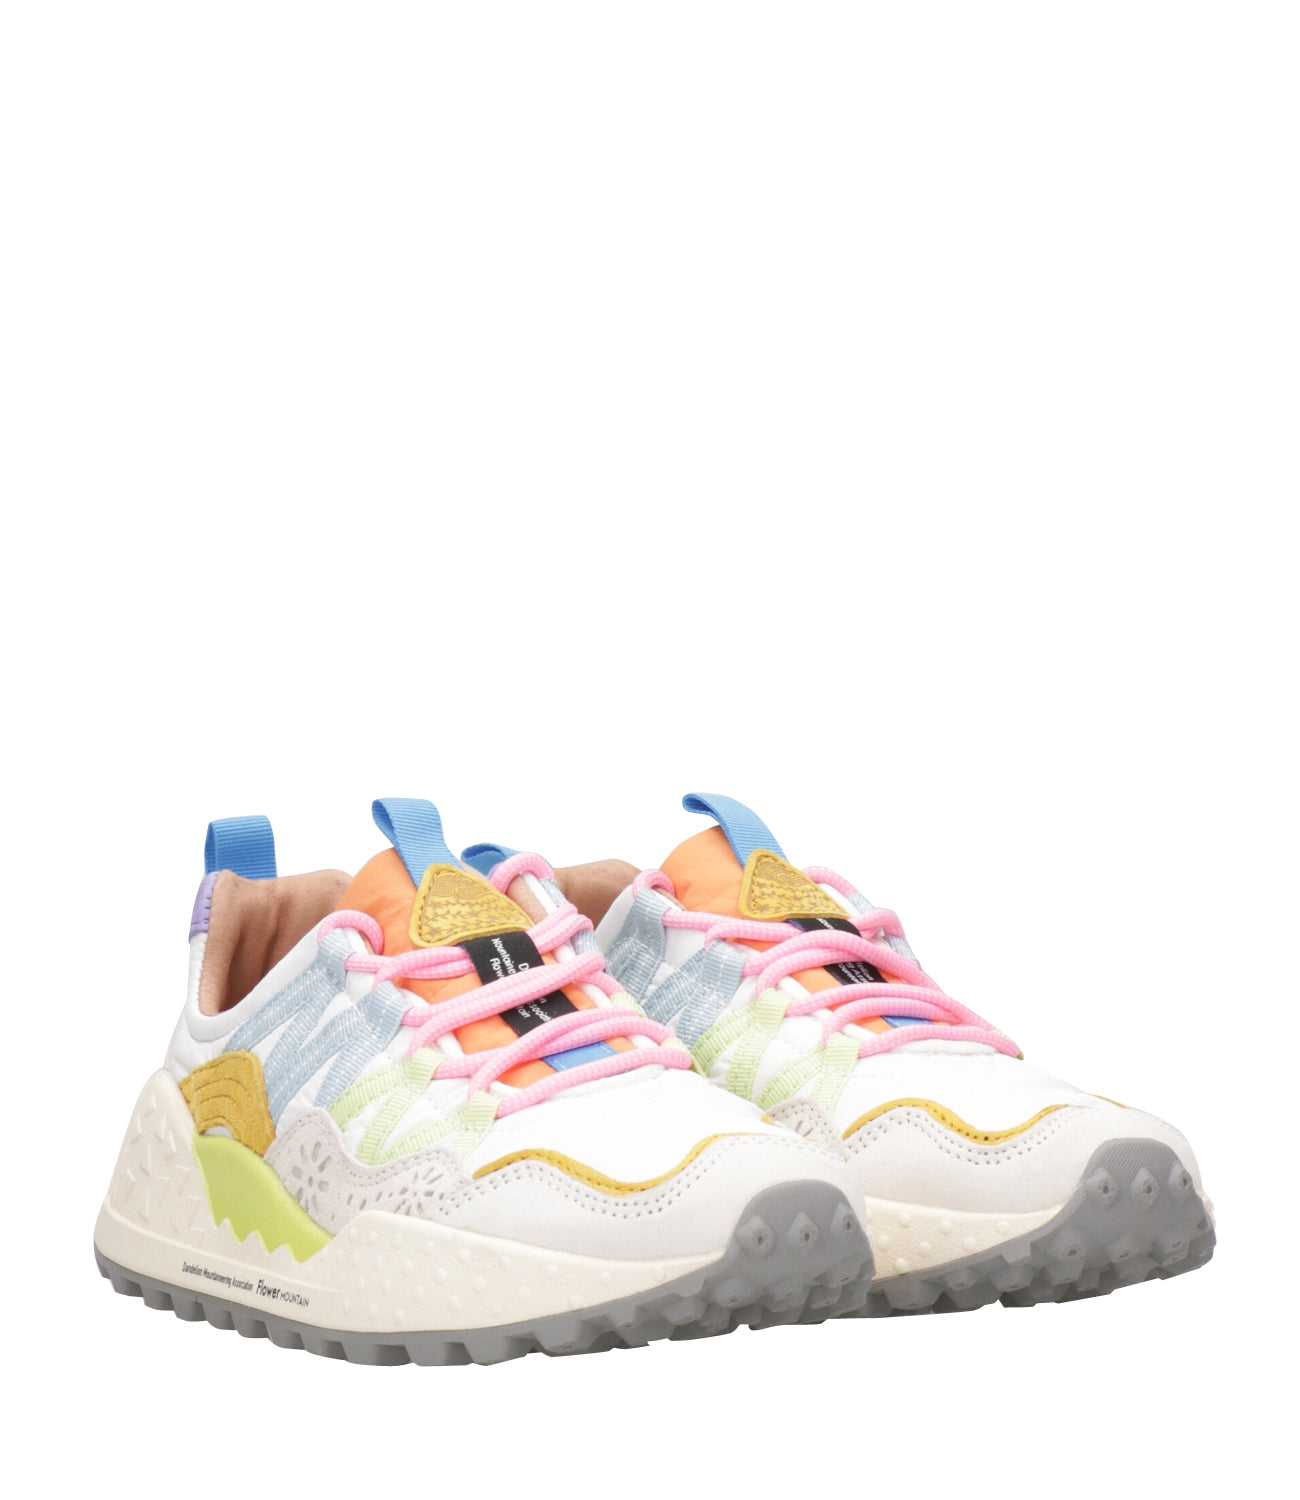 Flower Mountain | Sneakers Washi Beige and White